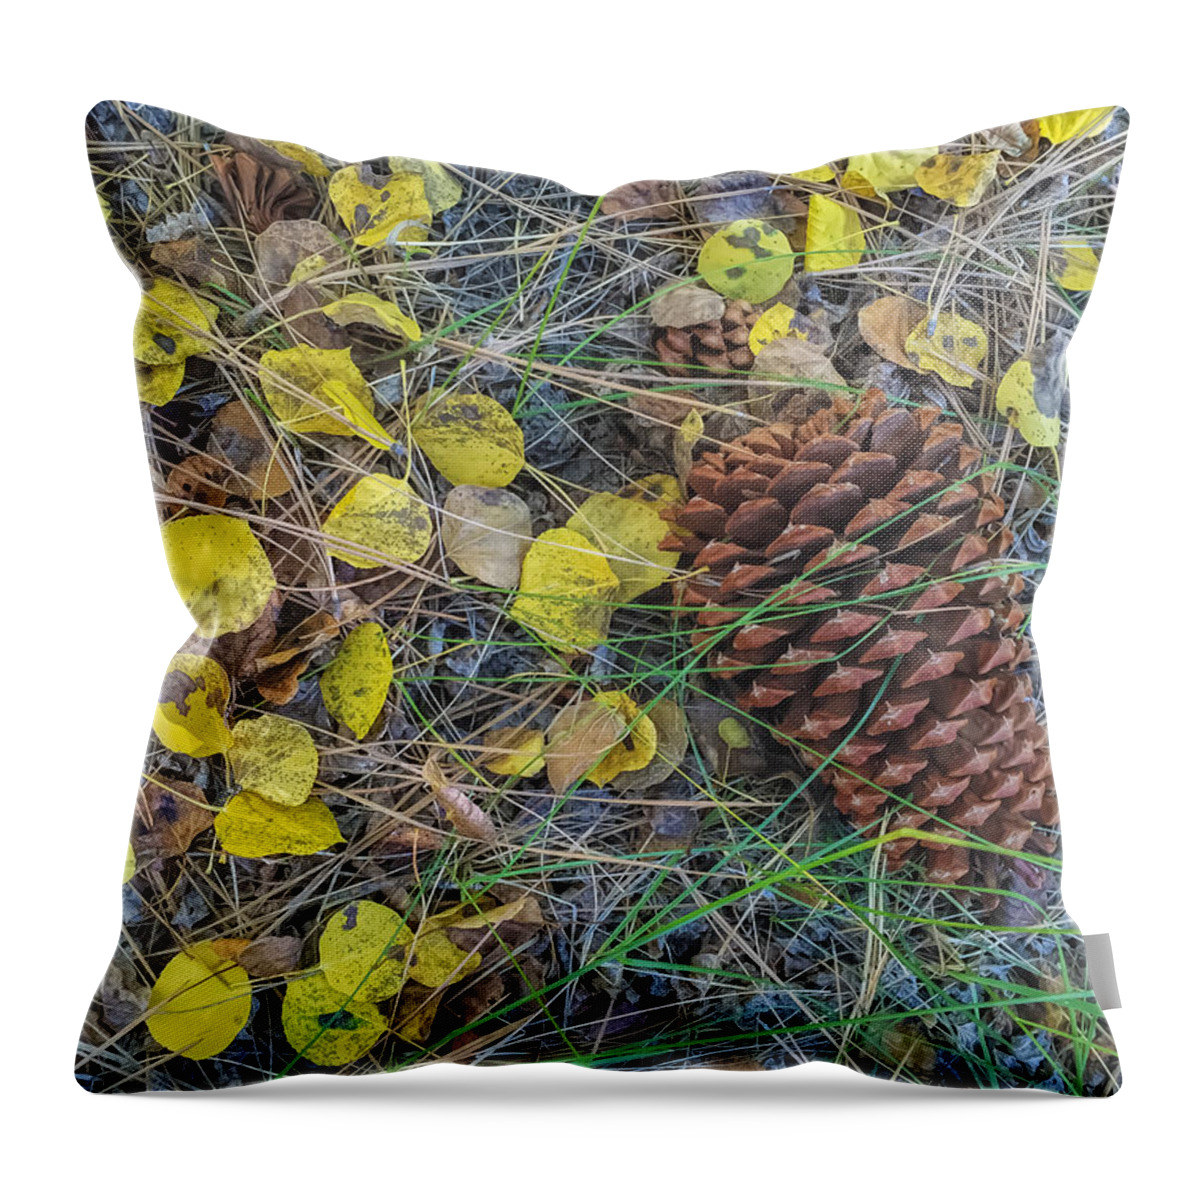 Fall Throw Pillow featuring the photograph Remnants by Jonathan Nguyen